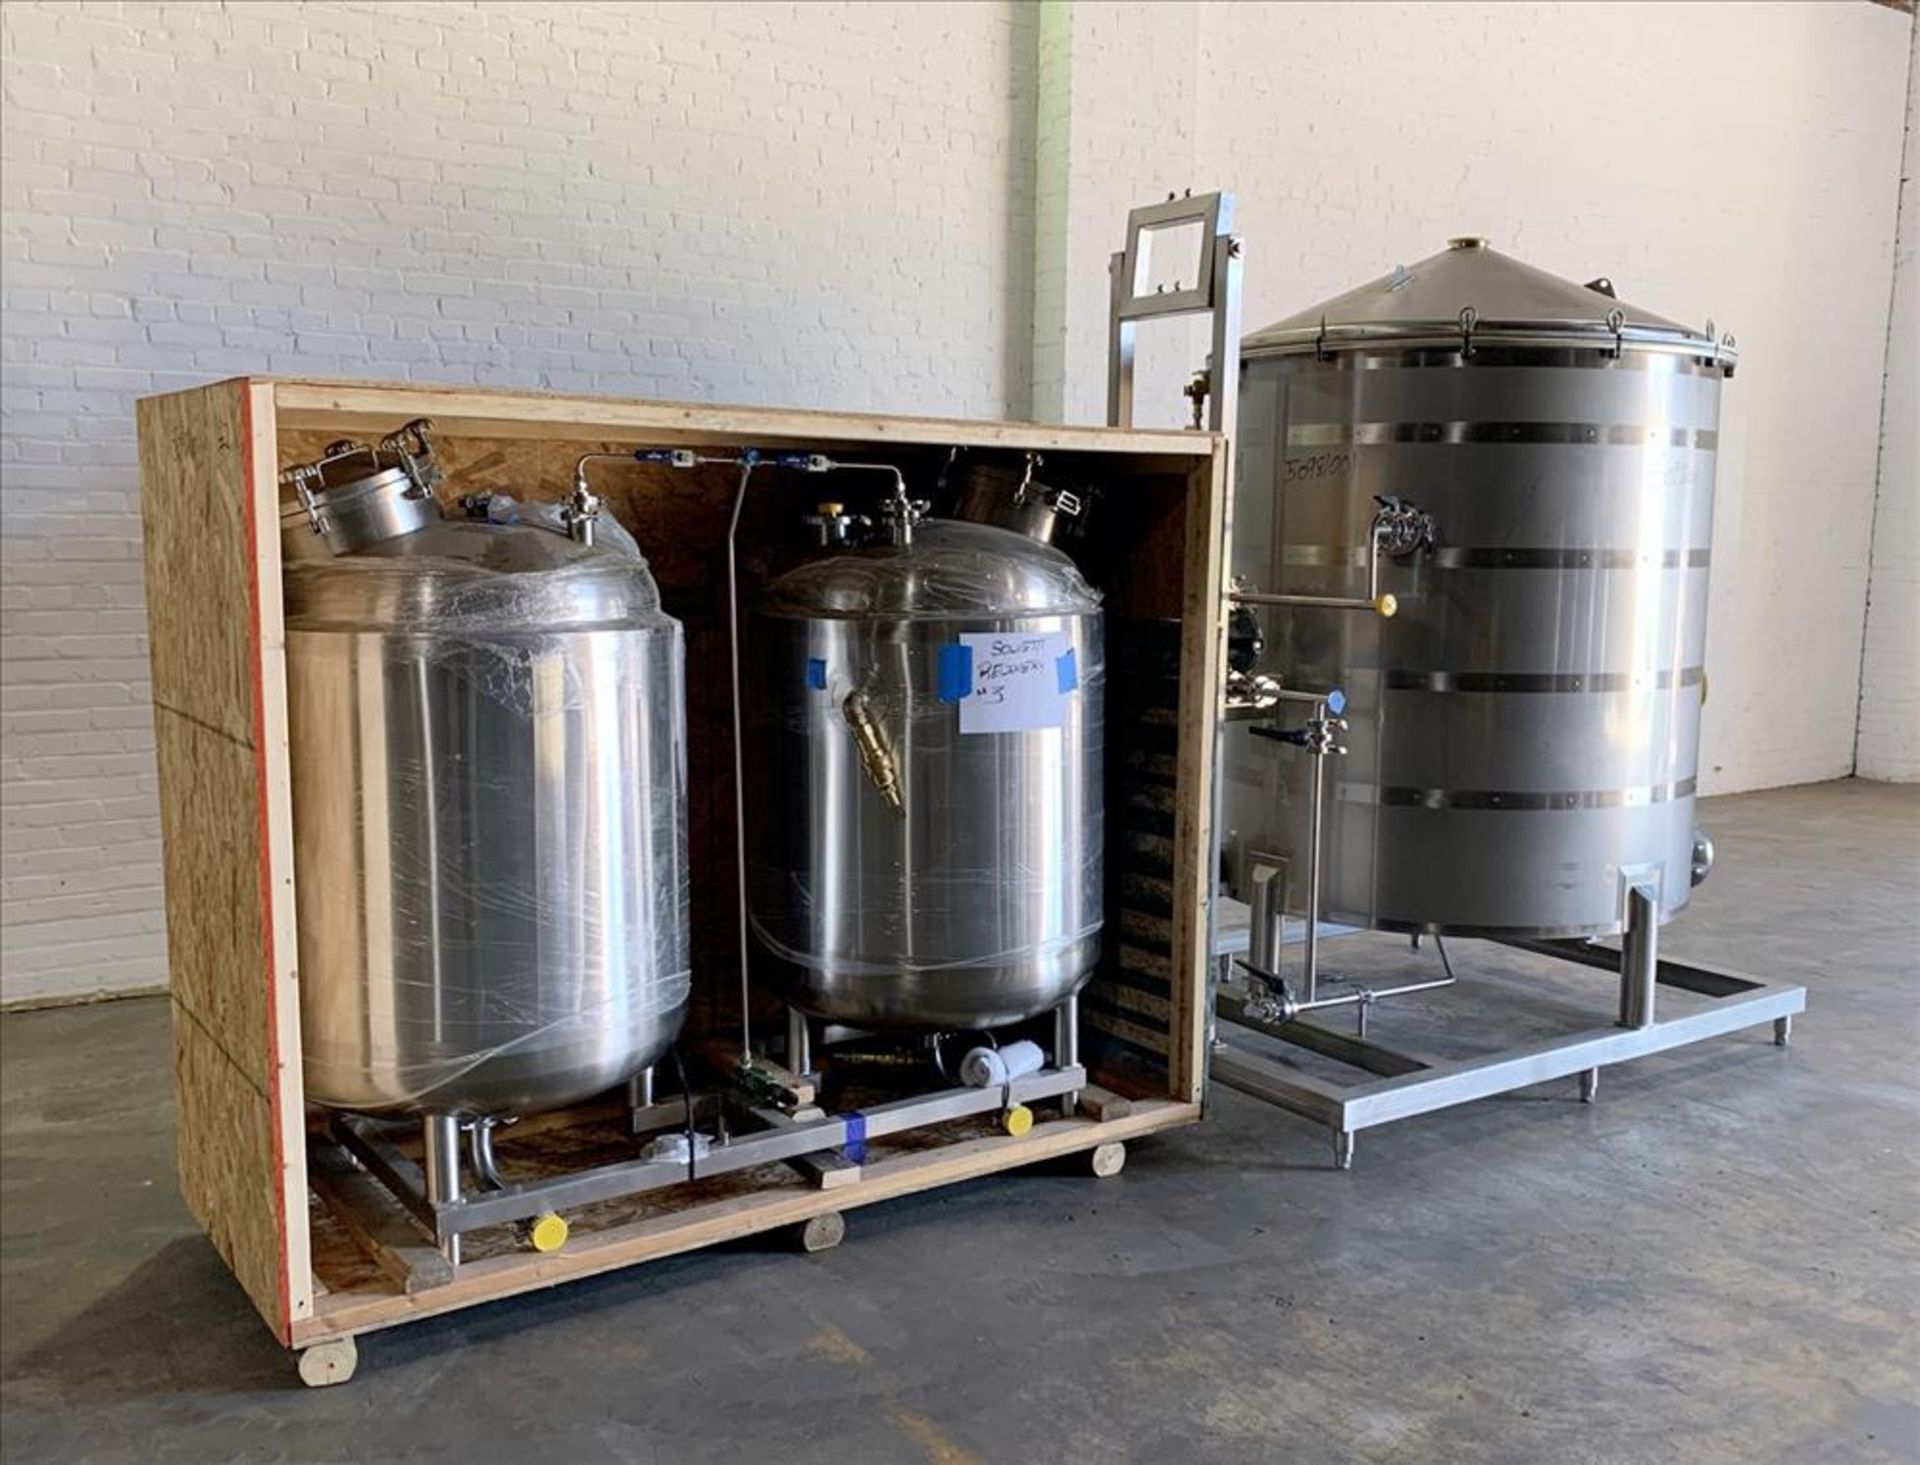 New In Crates - Eden Labs LLC Industrial 500 Gallon Performance Solvent Recovery System - Image 18 of 152